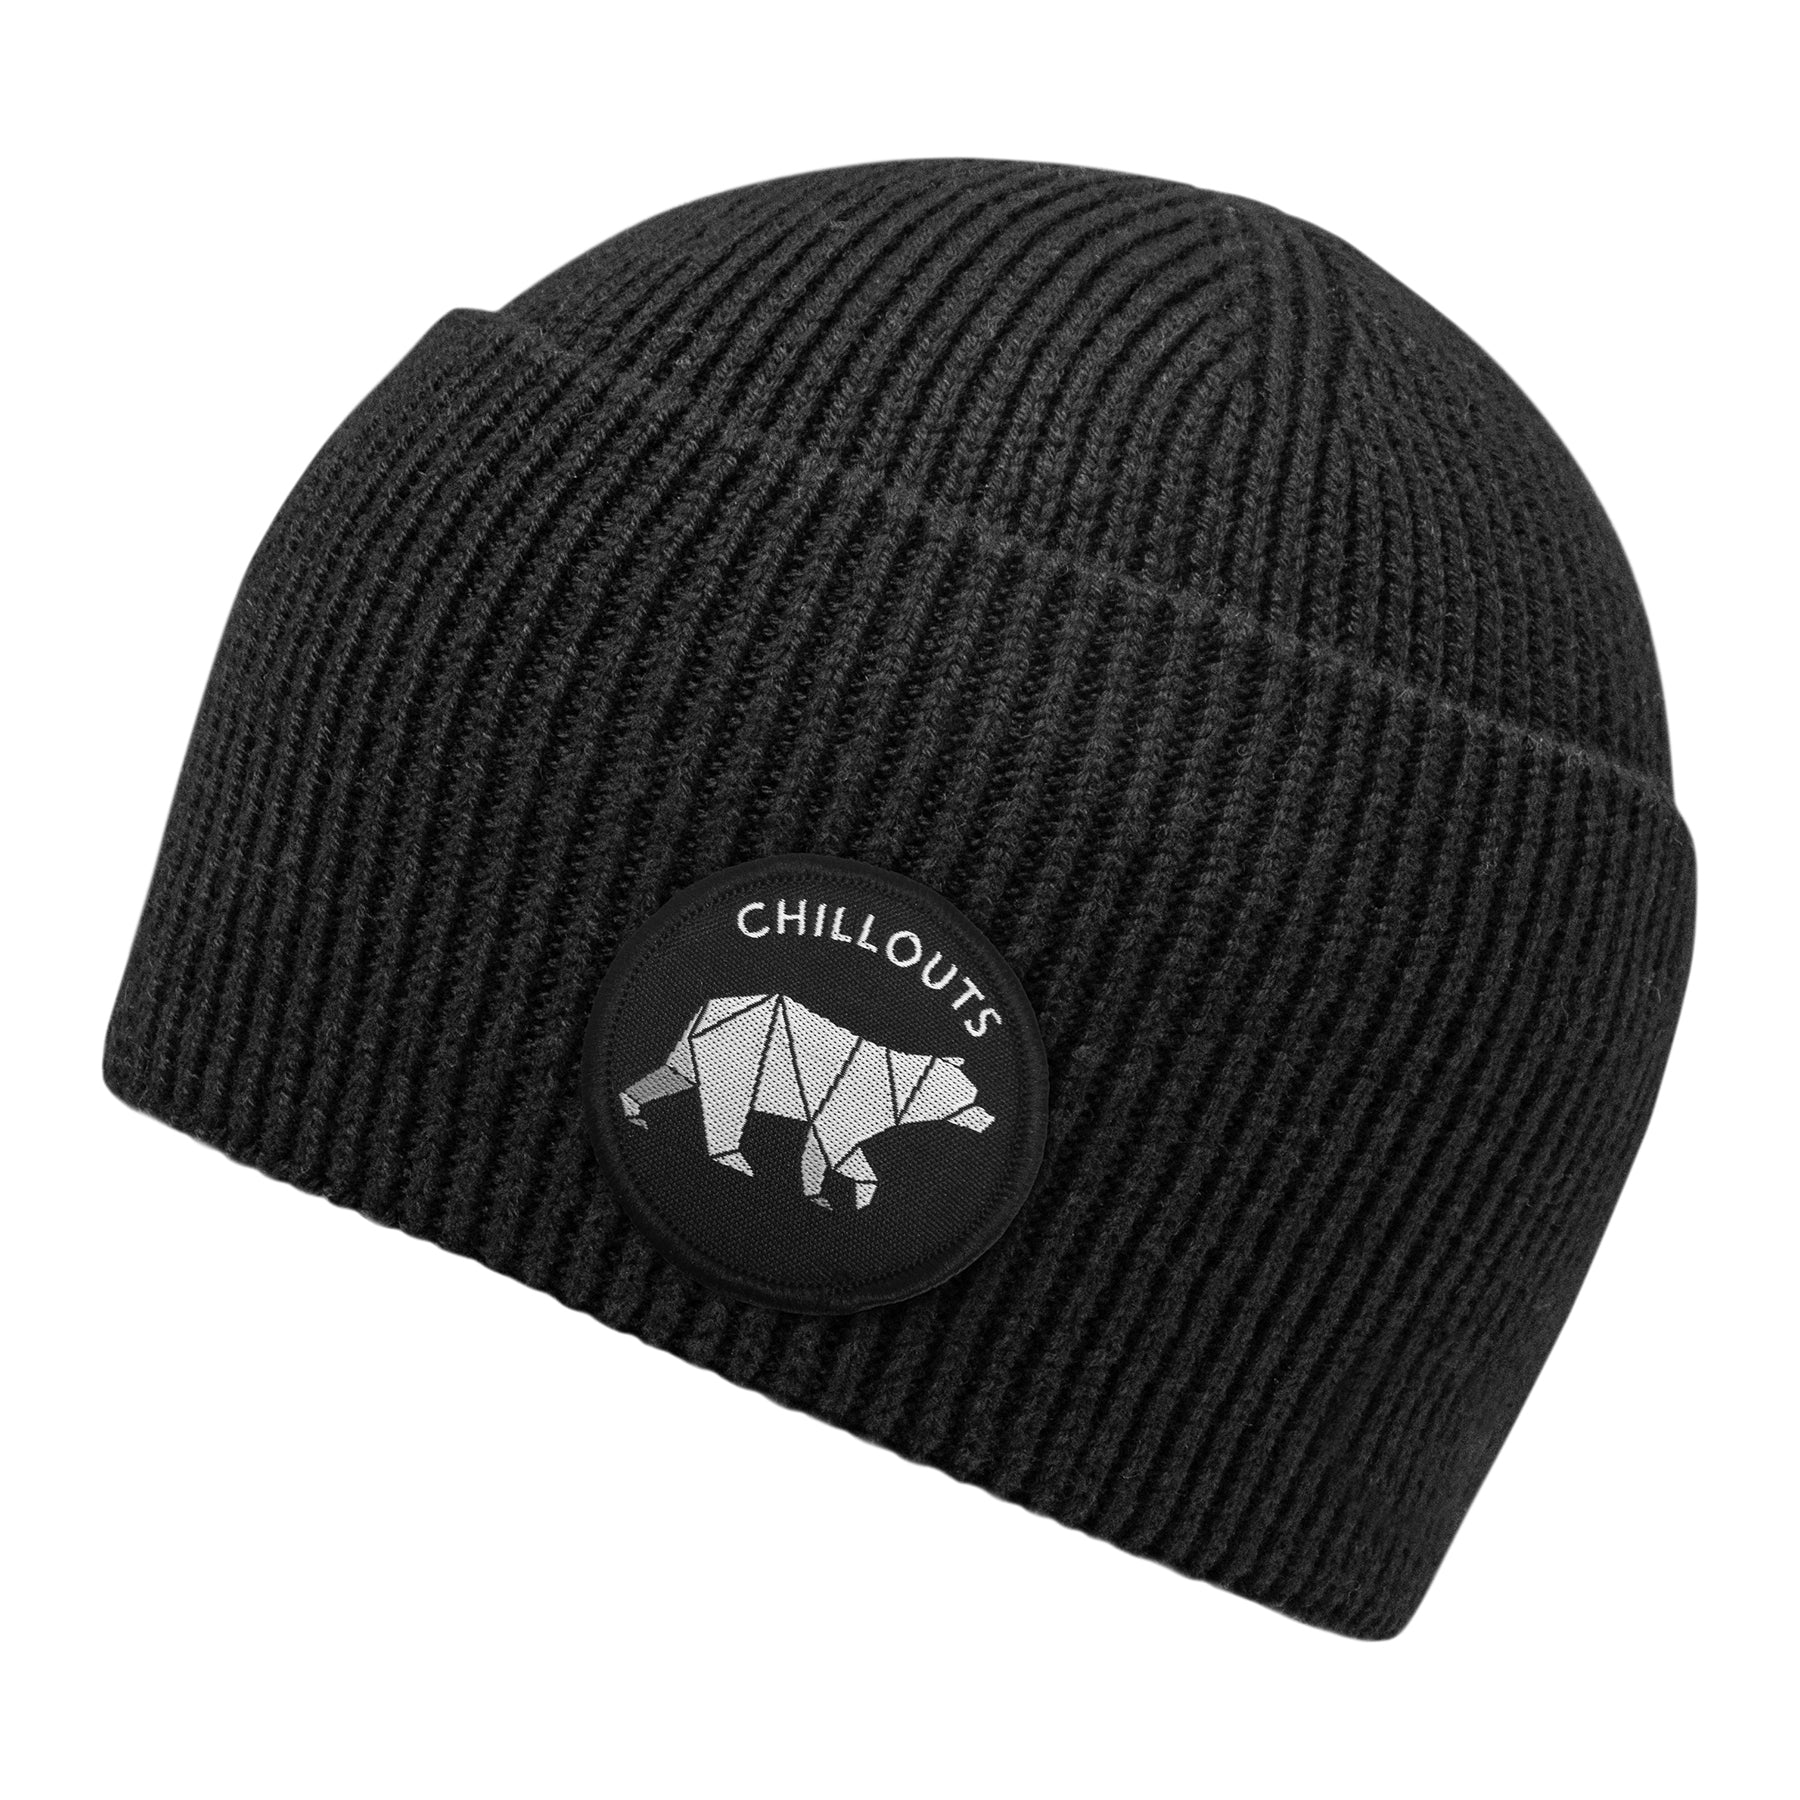 Beanie with cuff & embroidery Chillouts – - a hat good Headwear for cool cause